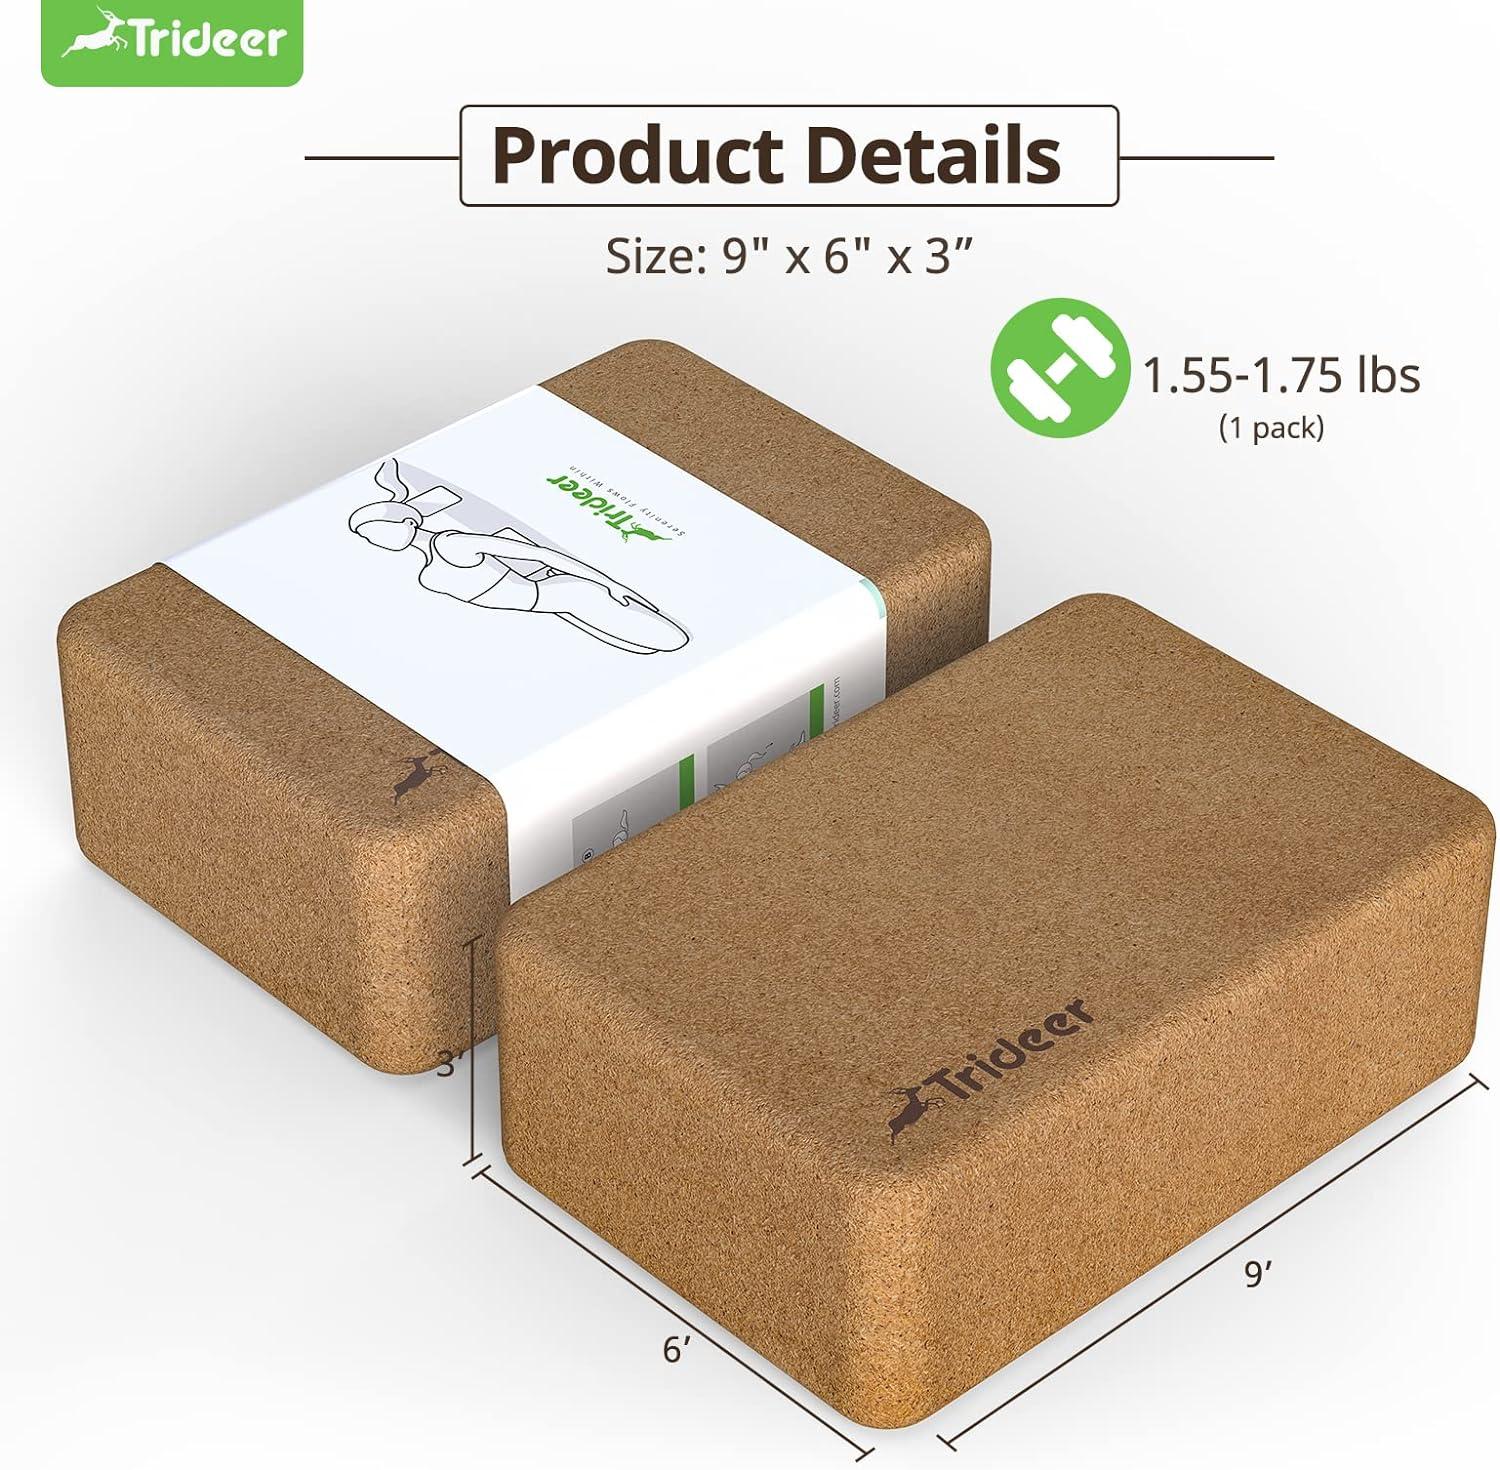 Trideer Cork Yoga Blocks 2 Pack Natural Cork Block High Density Yoga Bricks  with Non Slip Surface Eco-Friendly Yoga Accessories for Women Ideal for Yoga  General Fitness Pilates Stretching Toning Workouts 9''*6''*3